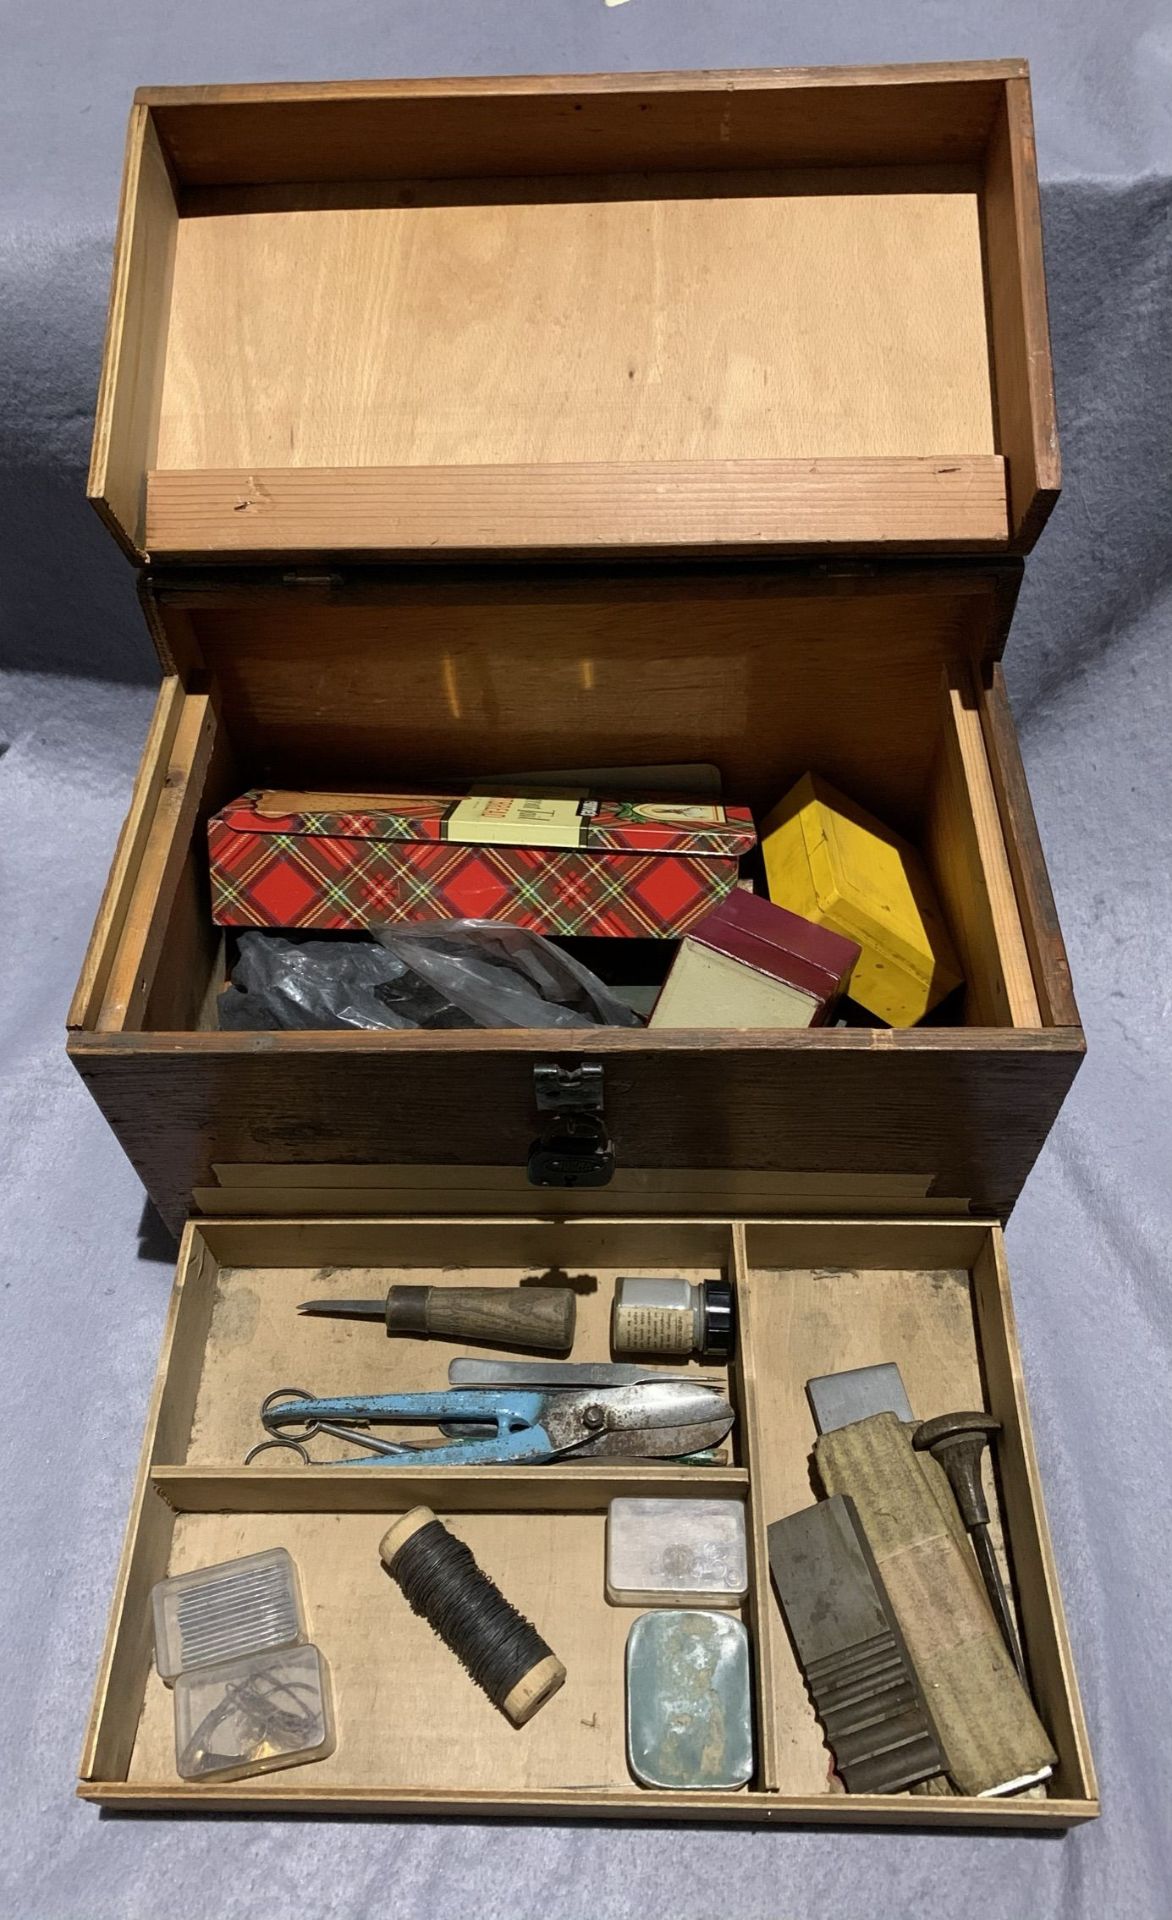 A jeweller's portable wooden workbox containing various tools and consumables and a small amount of